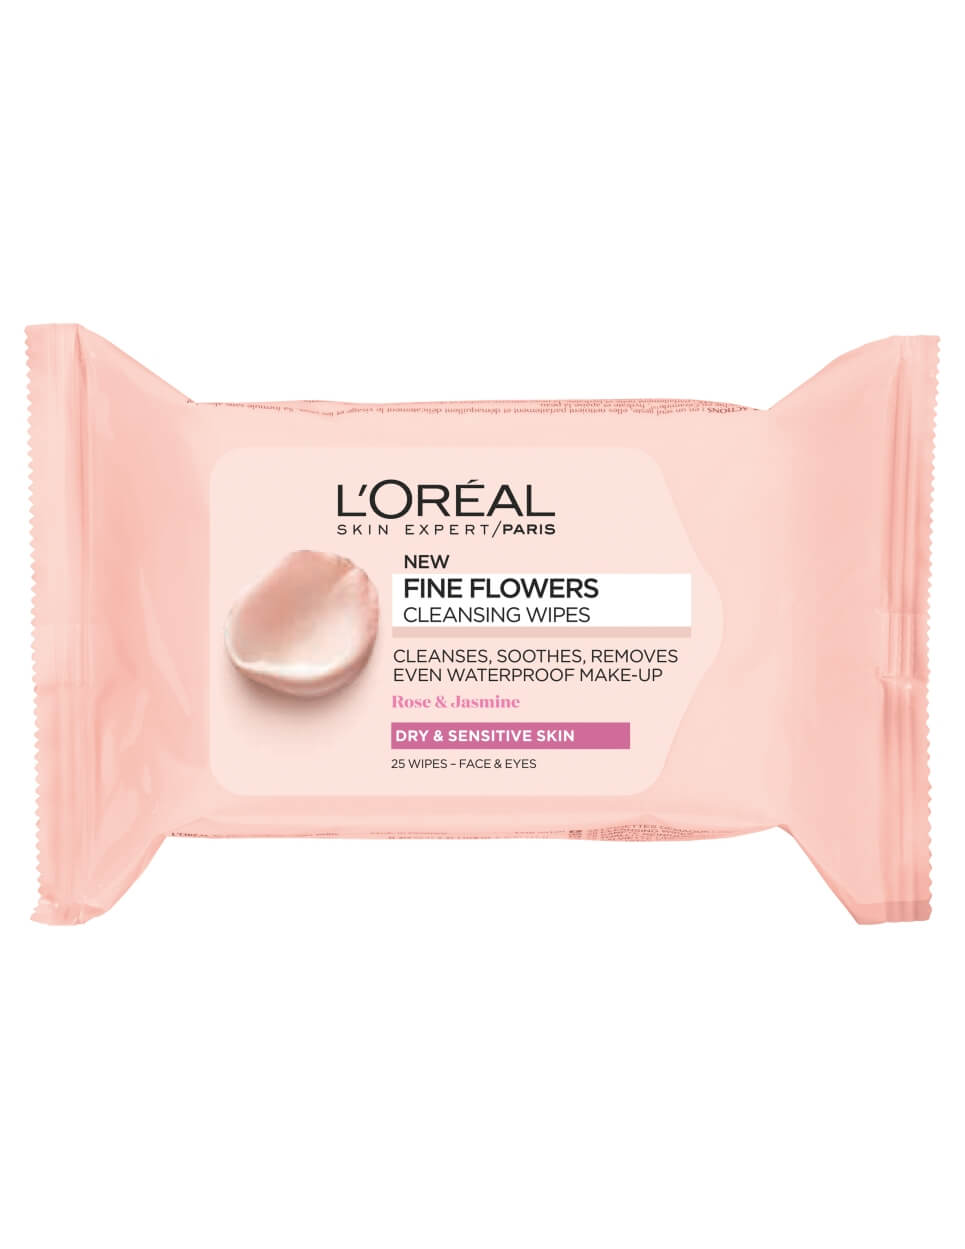 L'oreal Fine Flowers cleansing wipes